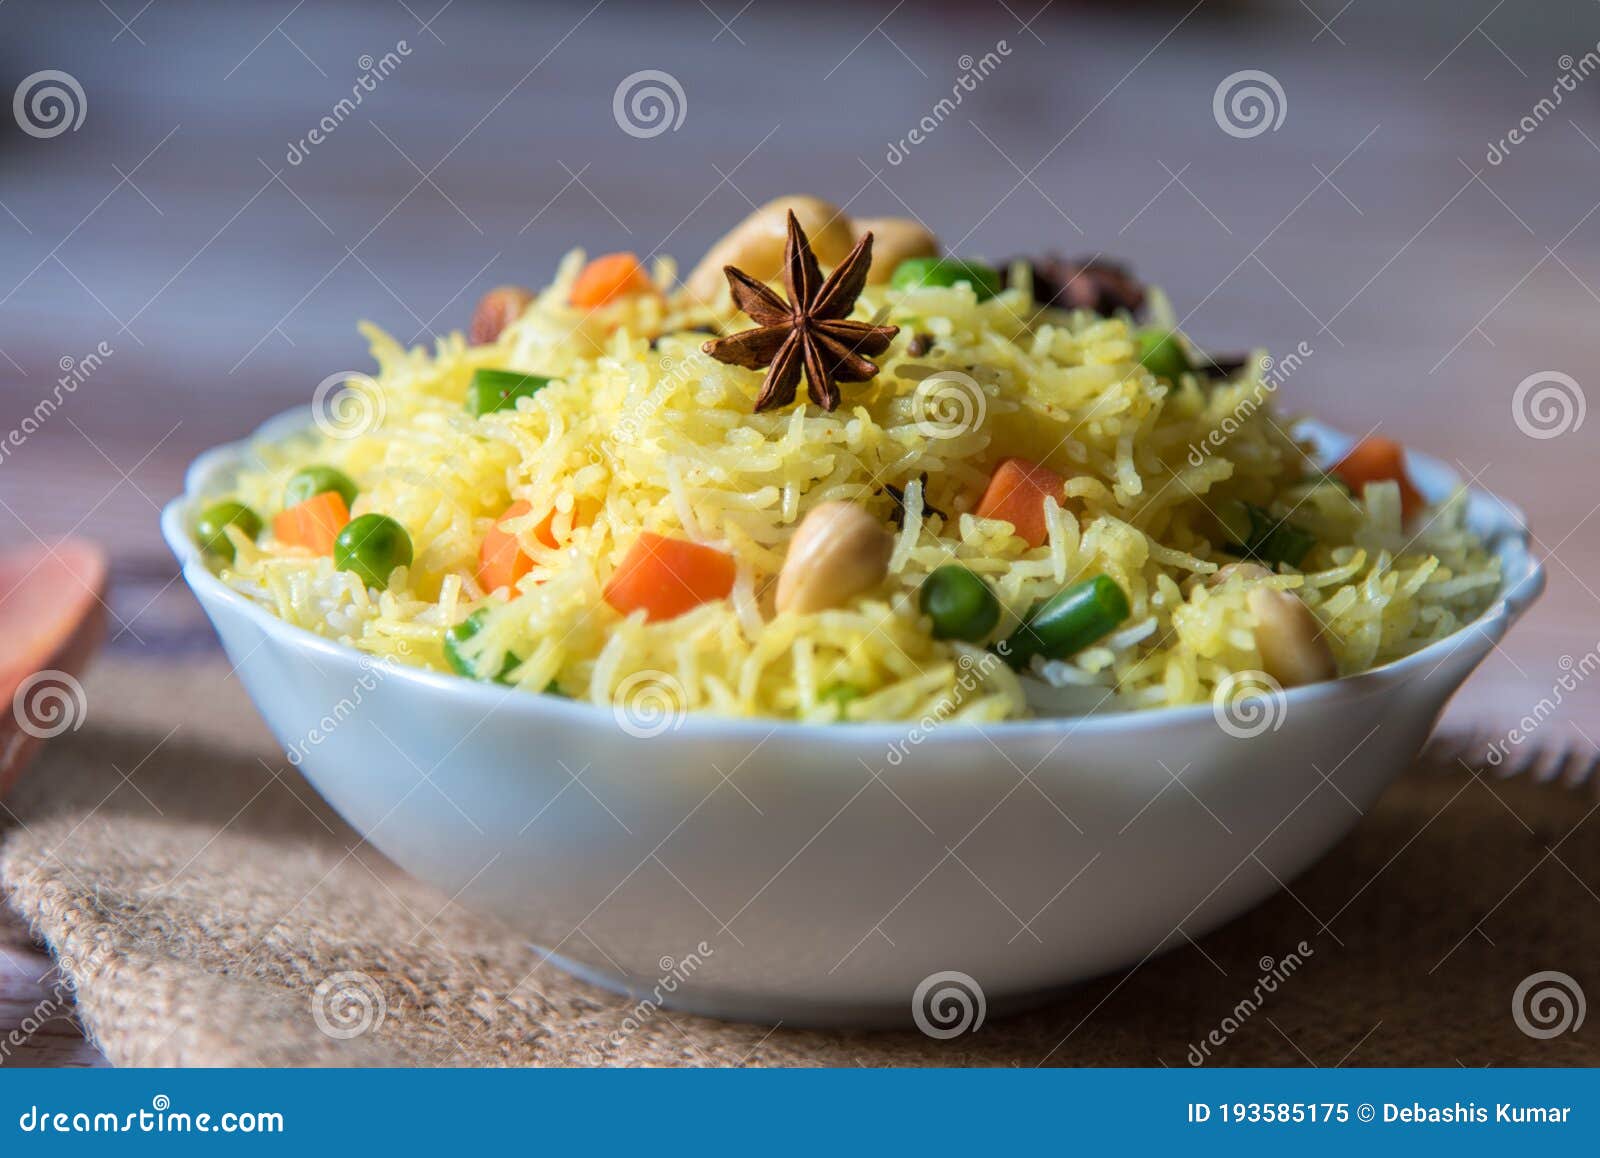 star anise on flavoured rice with vegetable